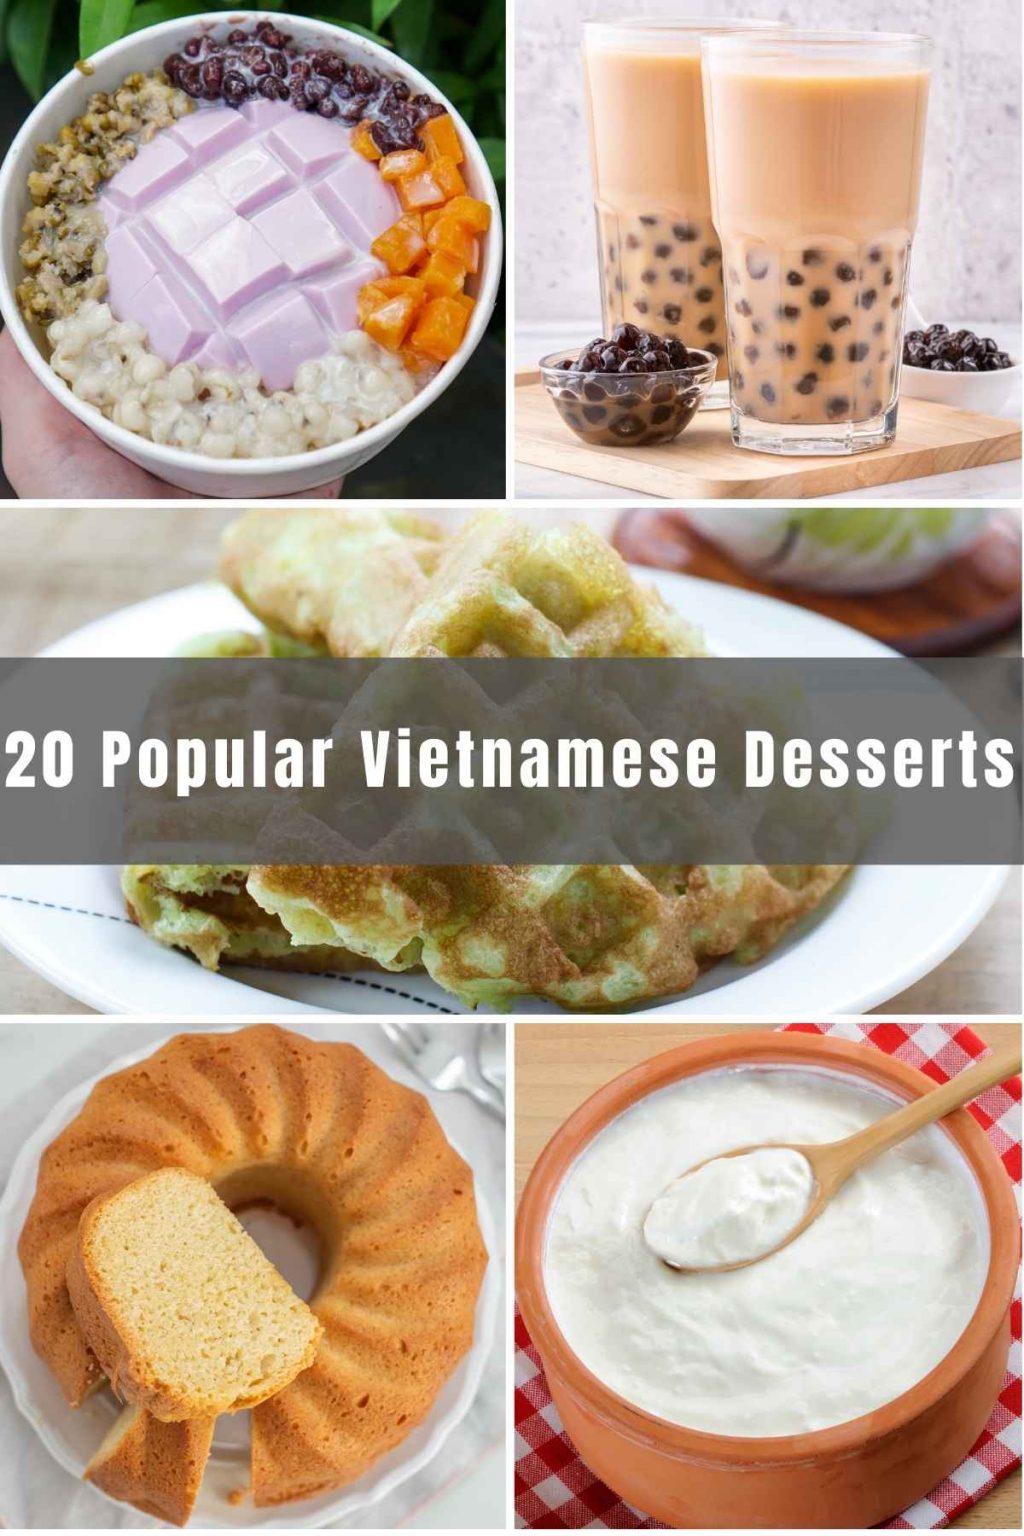 Popular Vietnamese Desserts that are Easy to Make at Home - IzzyCooking